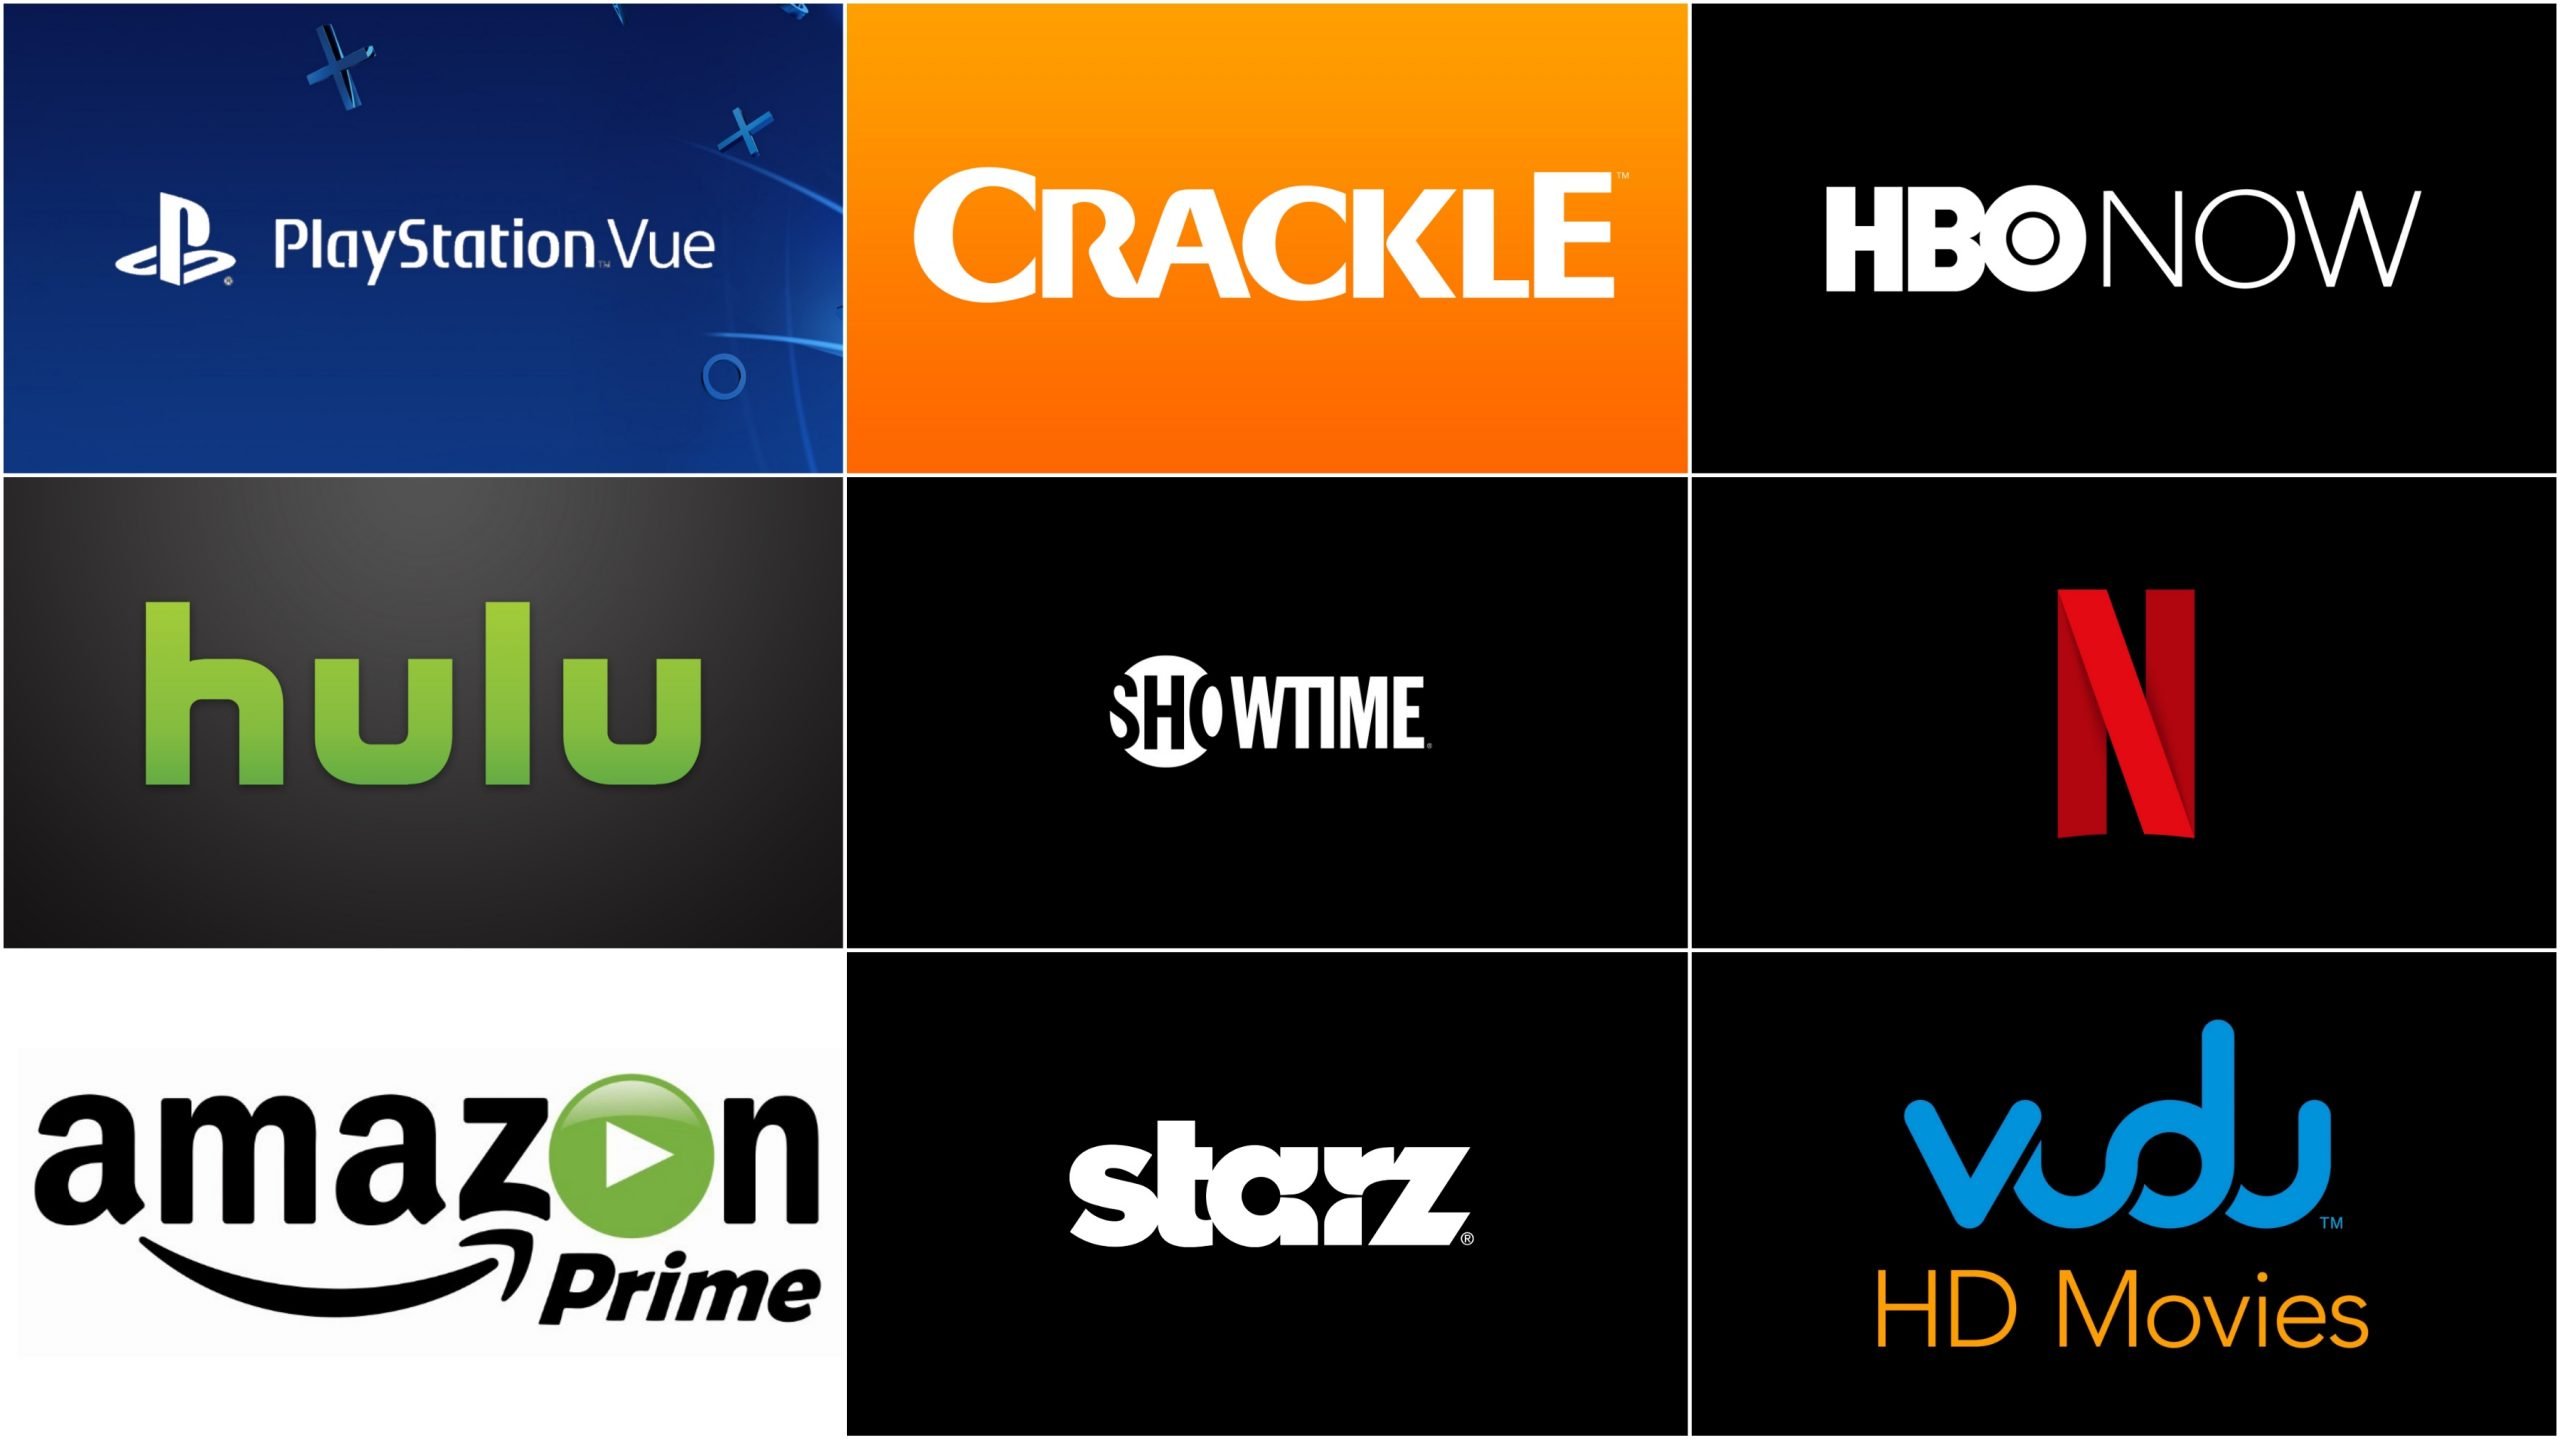 Every Major Streaming Service Ranked From Worst To Best